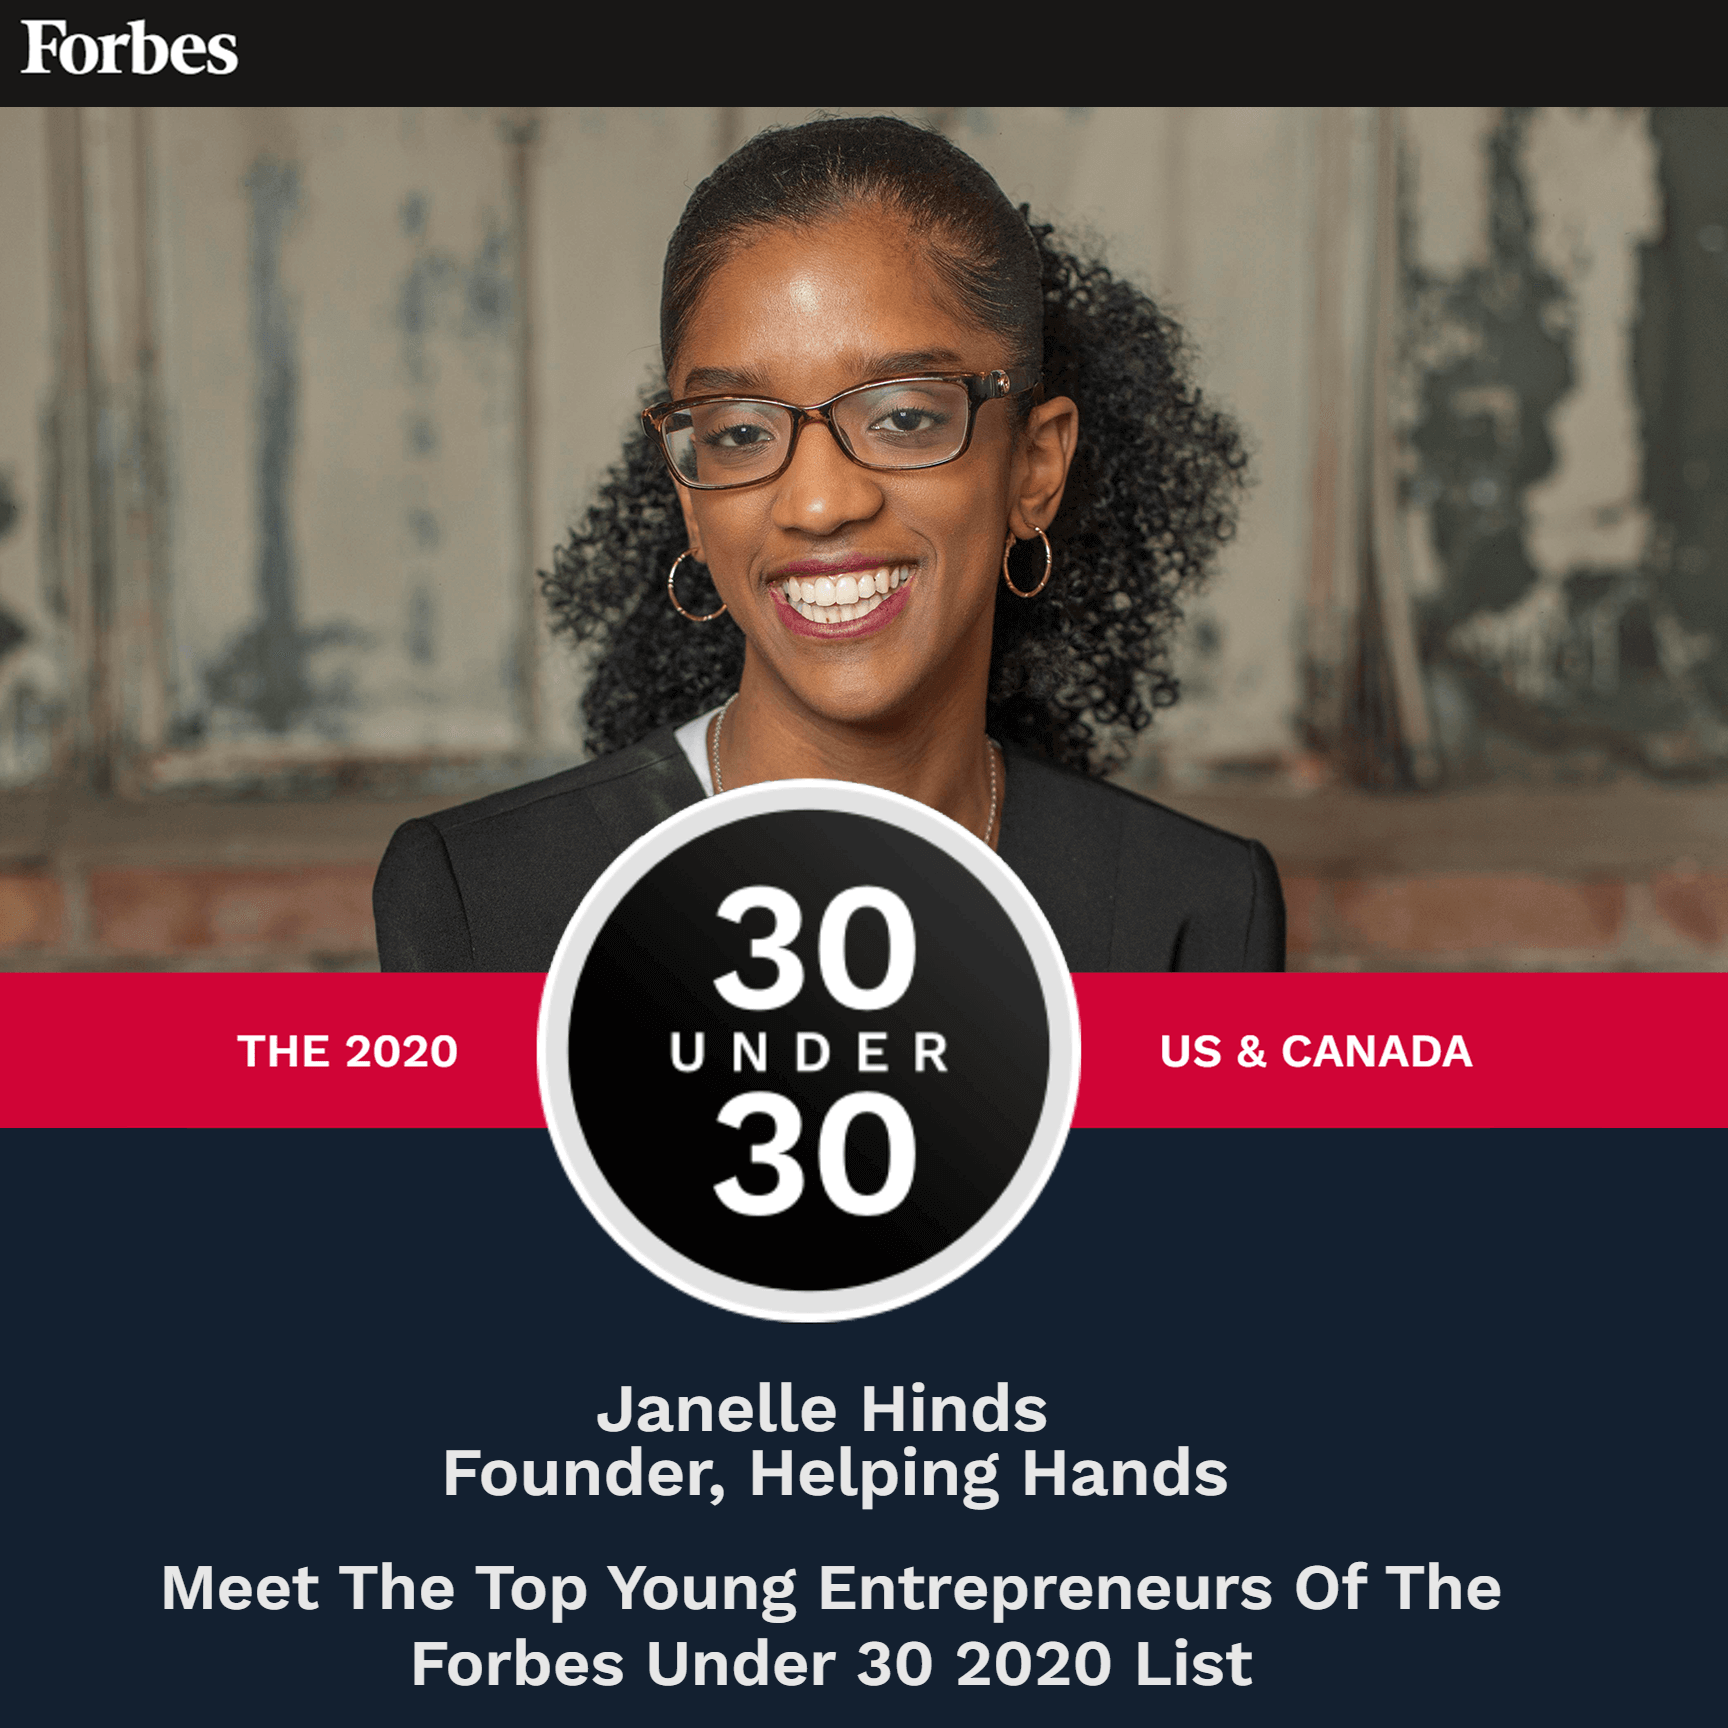 Founder Janelle Hinds featured in Forbes Under 30 for education